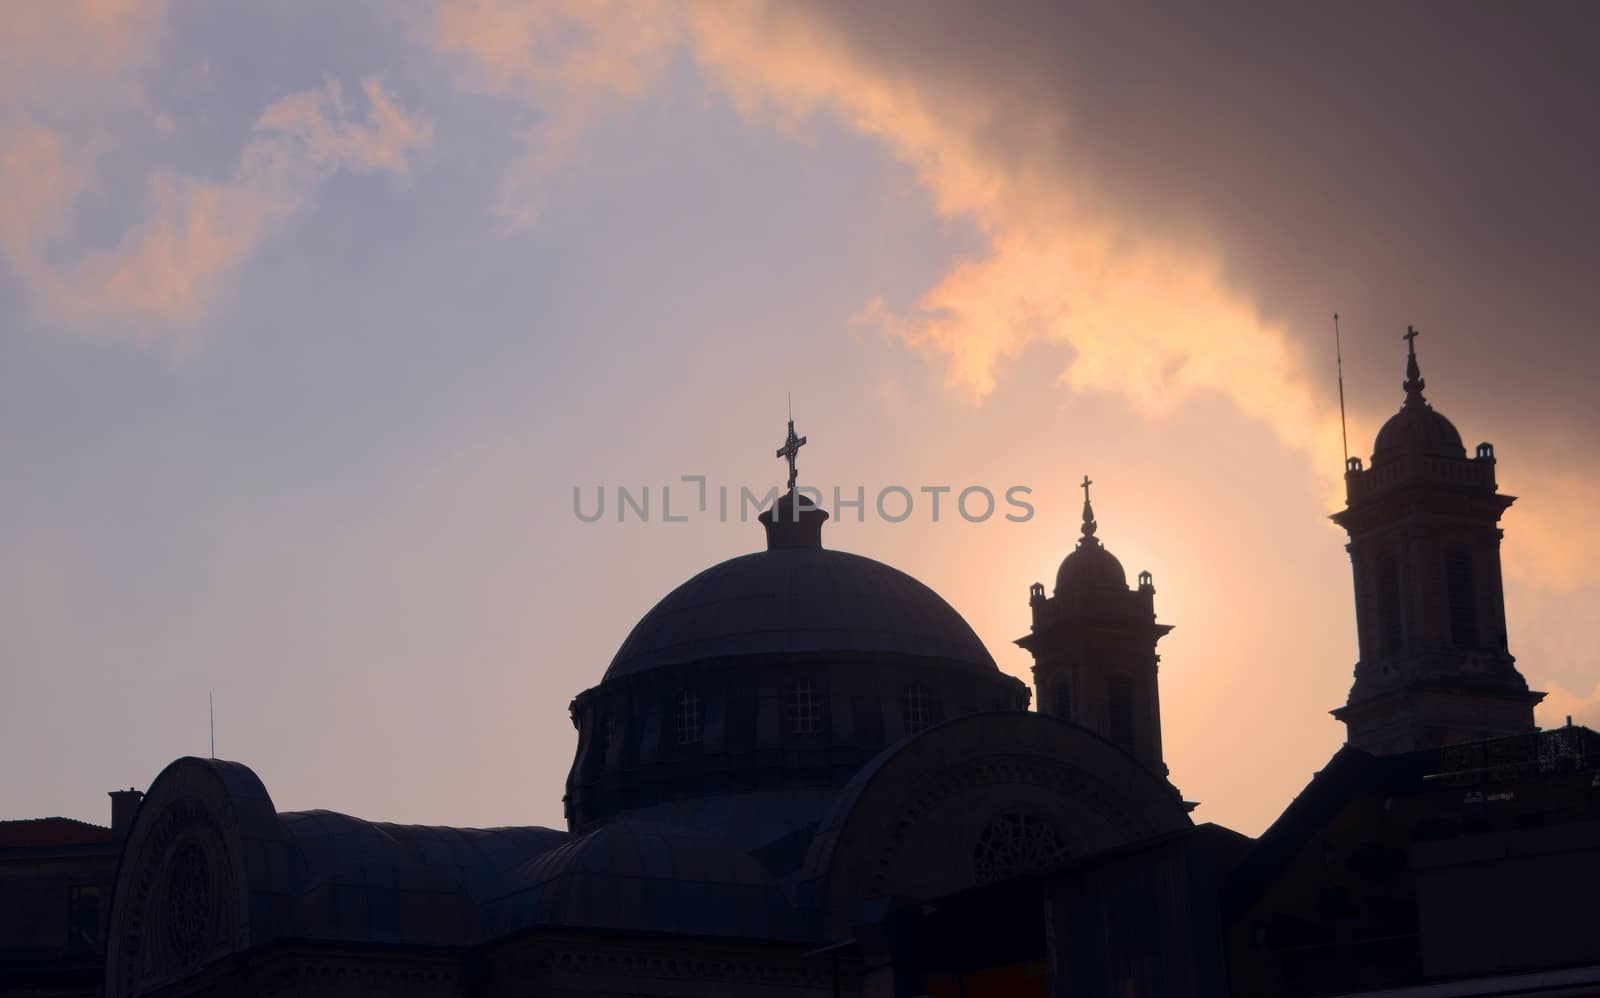 Church dome and christian crosses silhouetted against the afternoon sky in Istambul, Turkey. by hernan_hyper